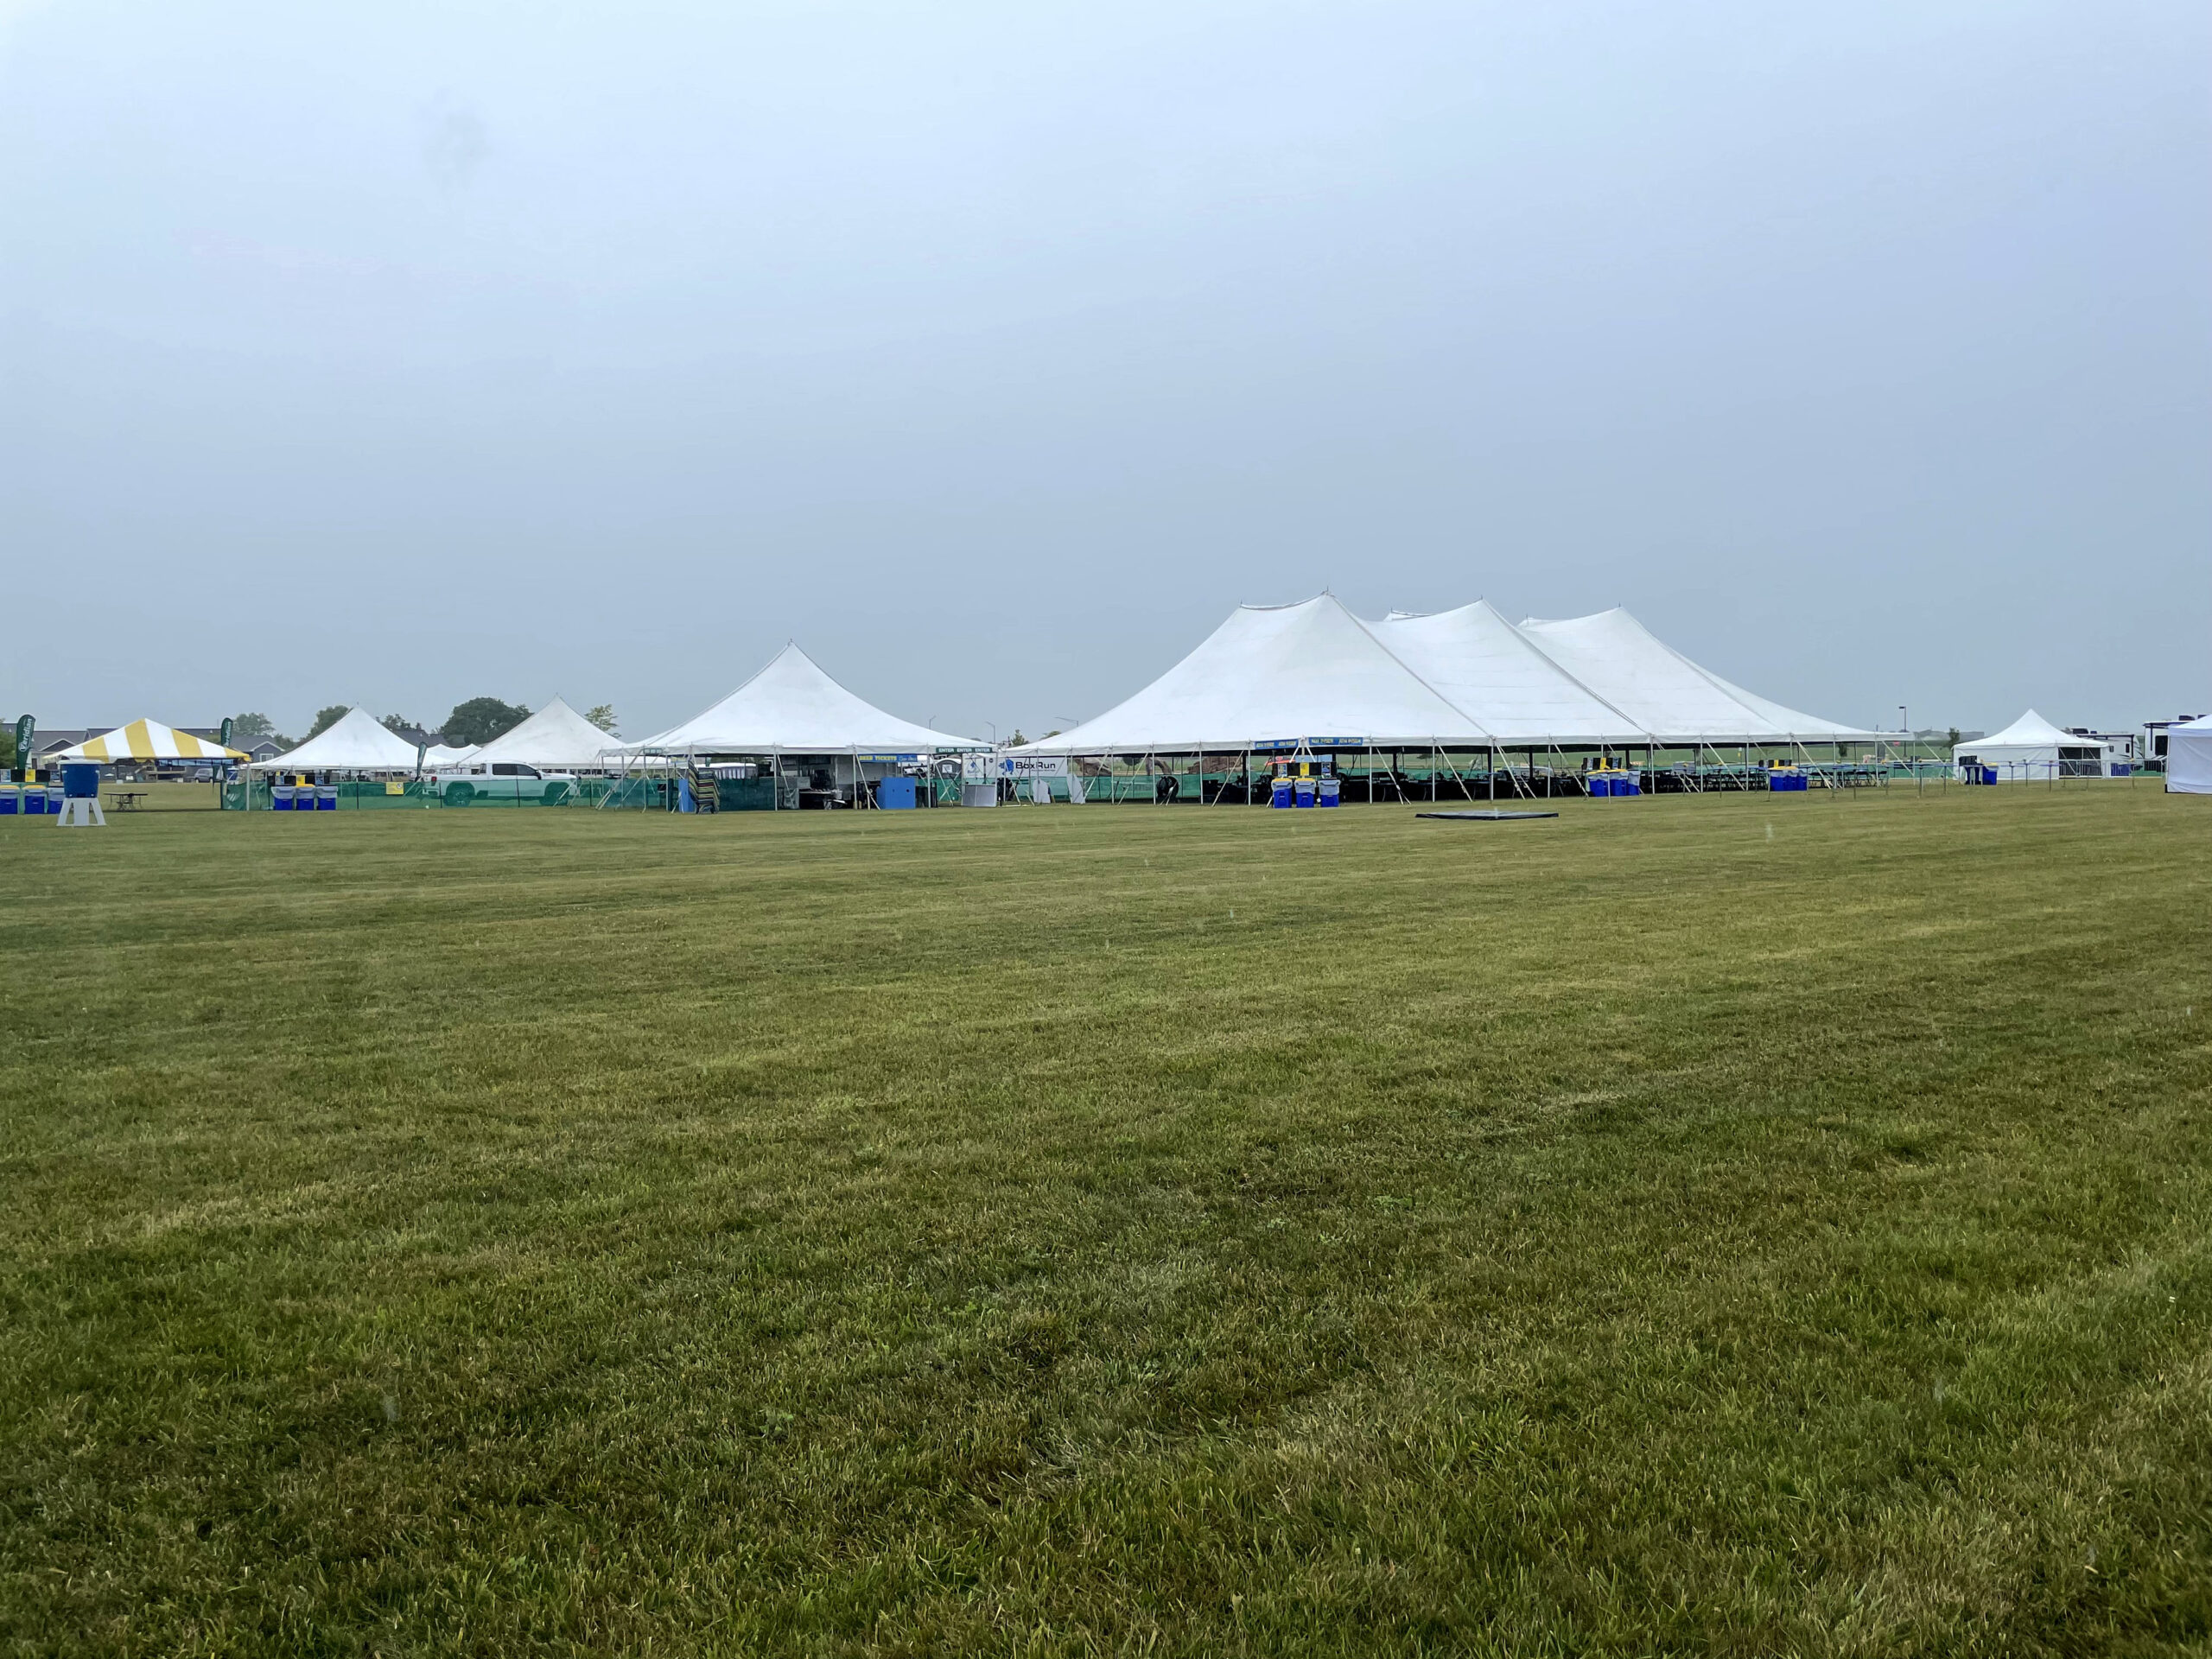 Multiple tents at the Blues & BBQ event in North Liberty, Iowa